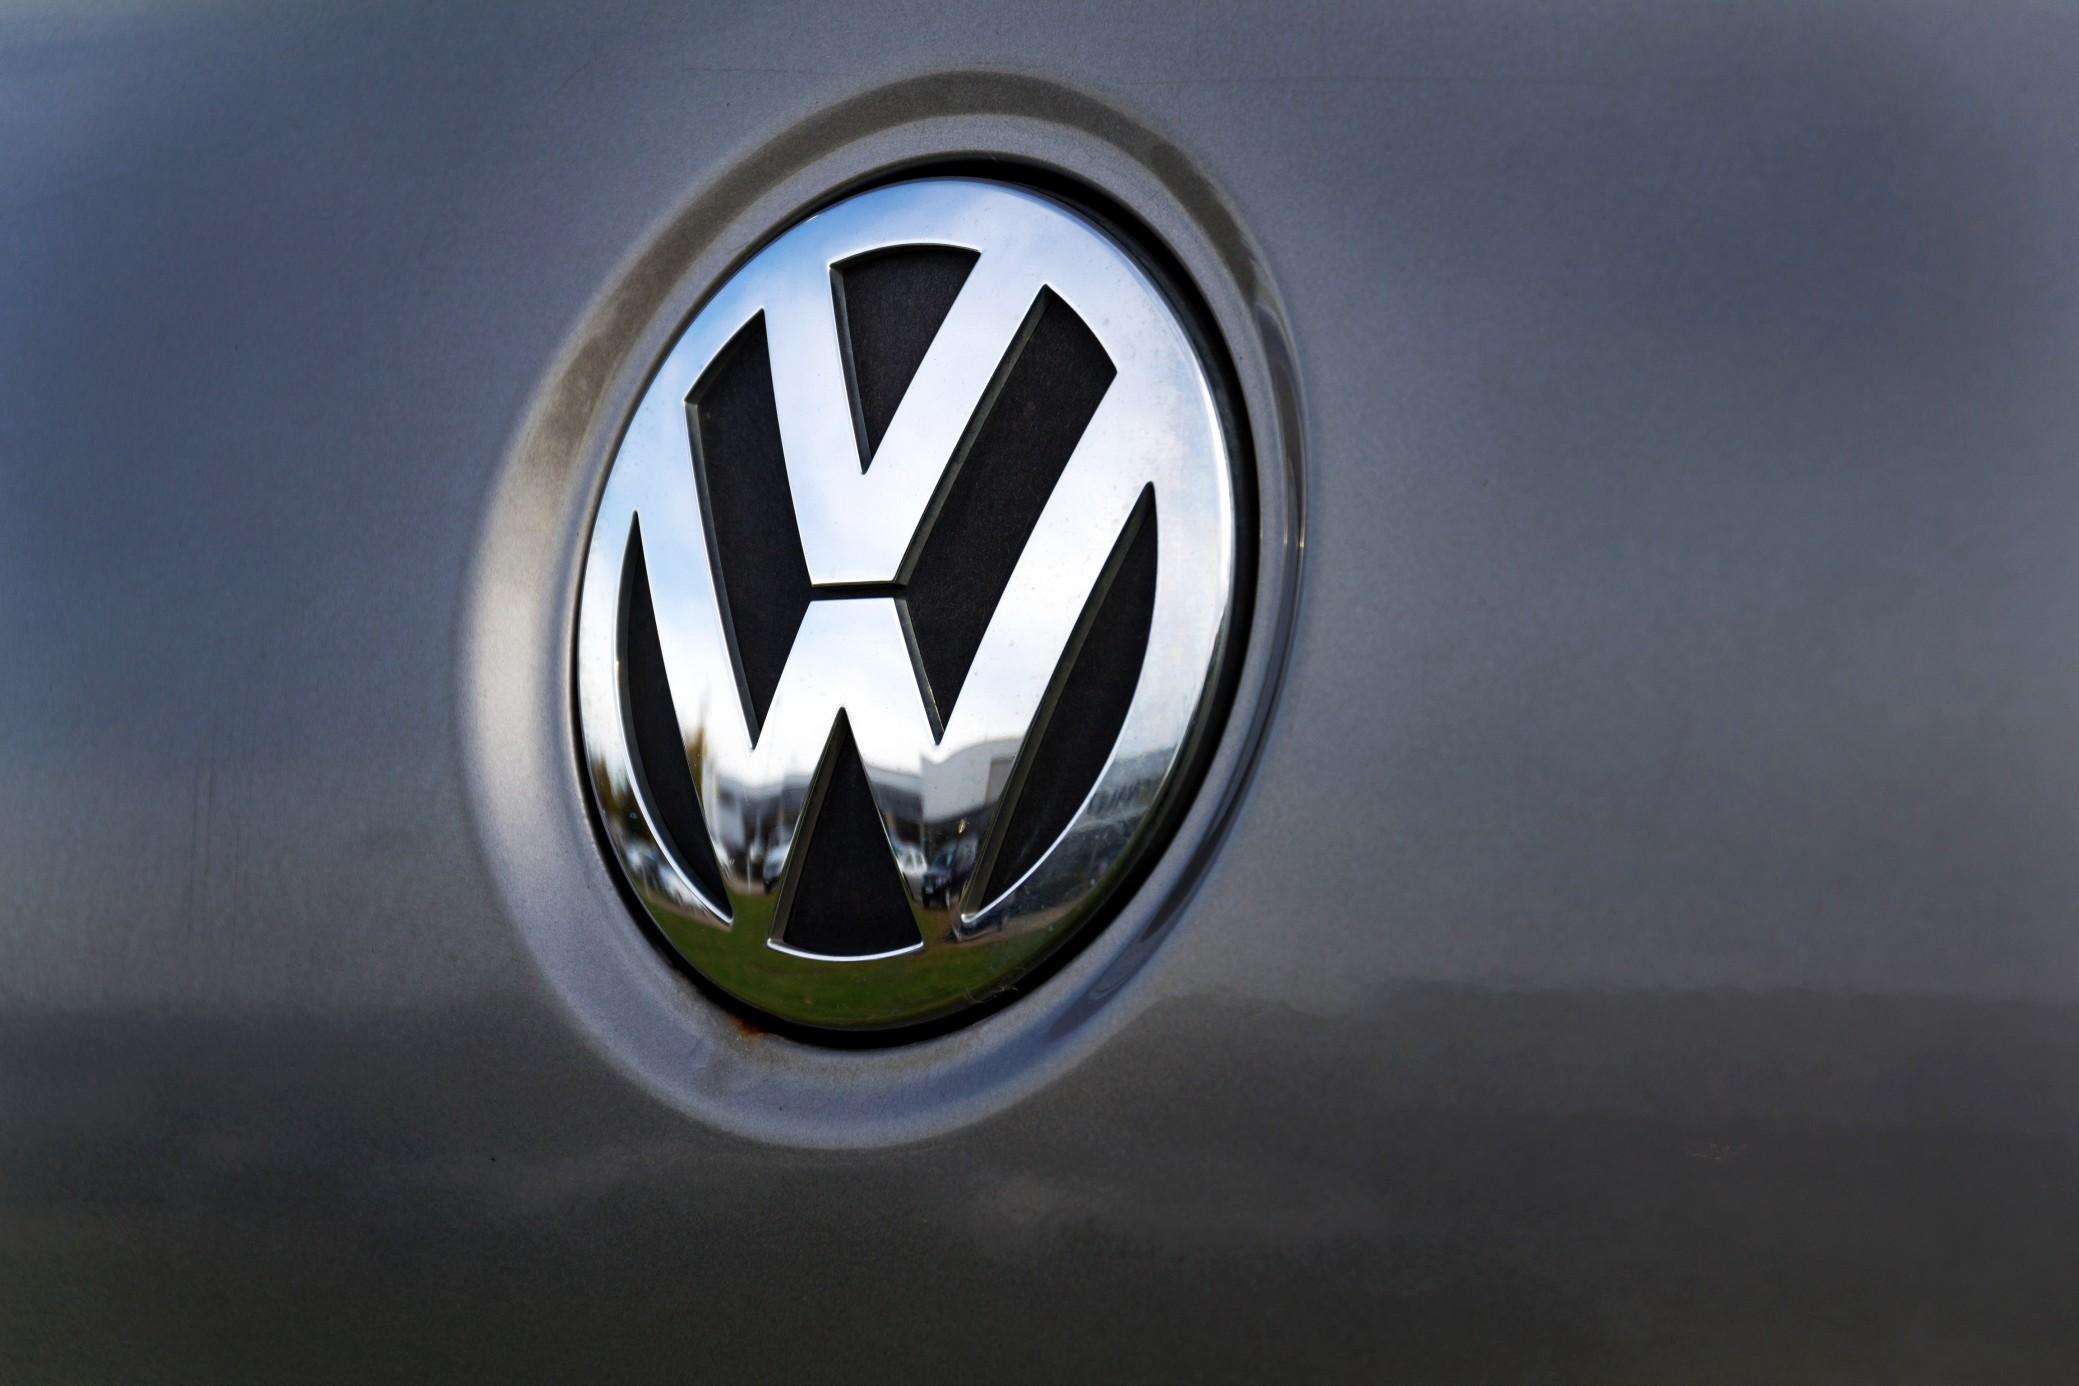 Volkswagen hopes 3D printing will make its manufacturing process smoother.